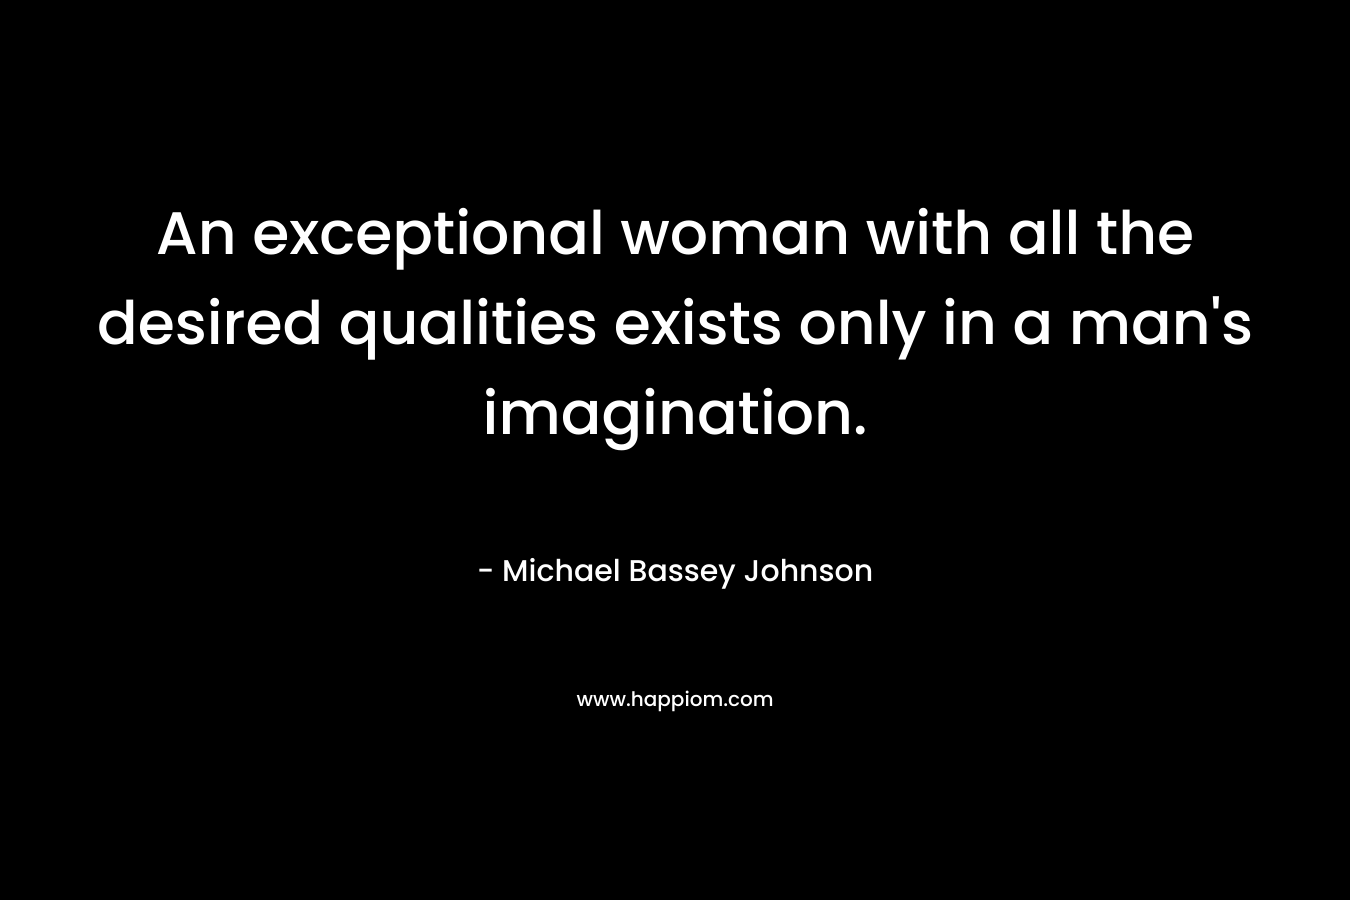 An exceptional woman with all the desired qualities exists only in a man's imagination.